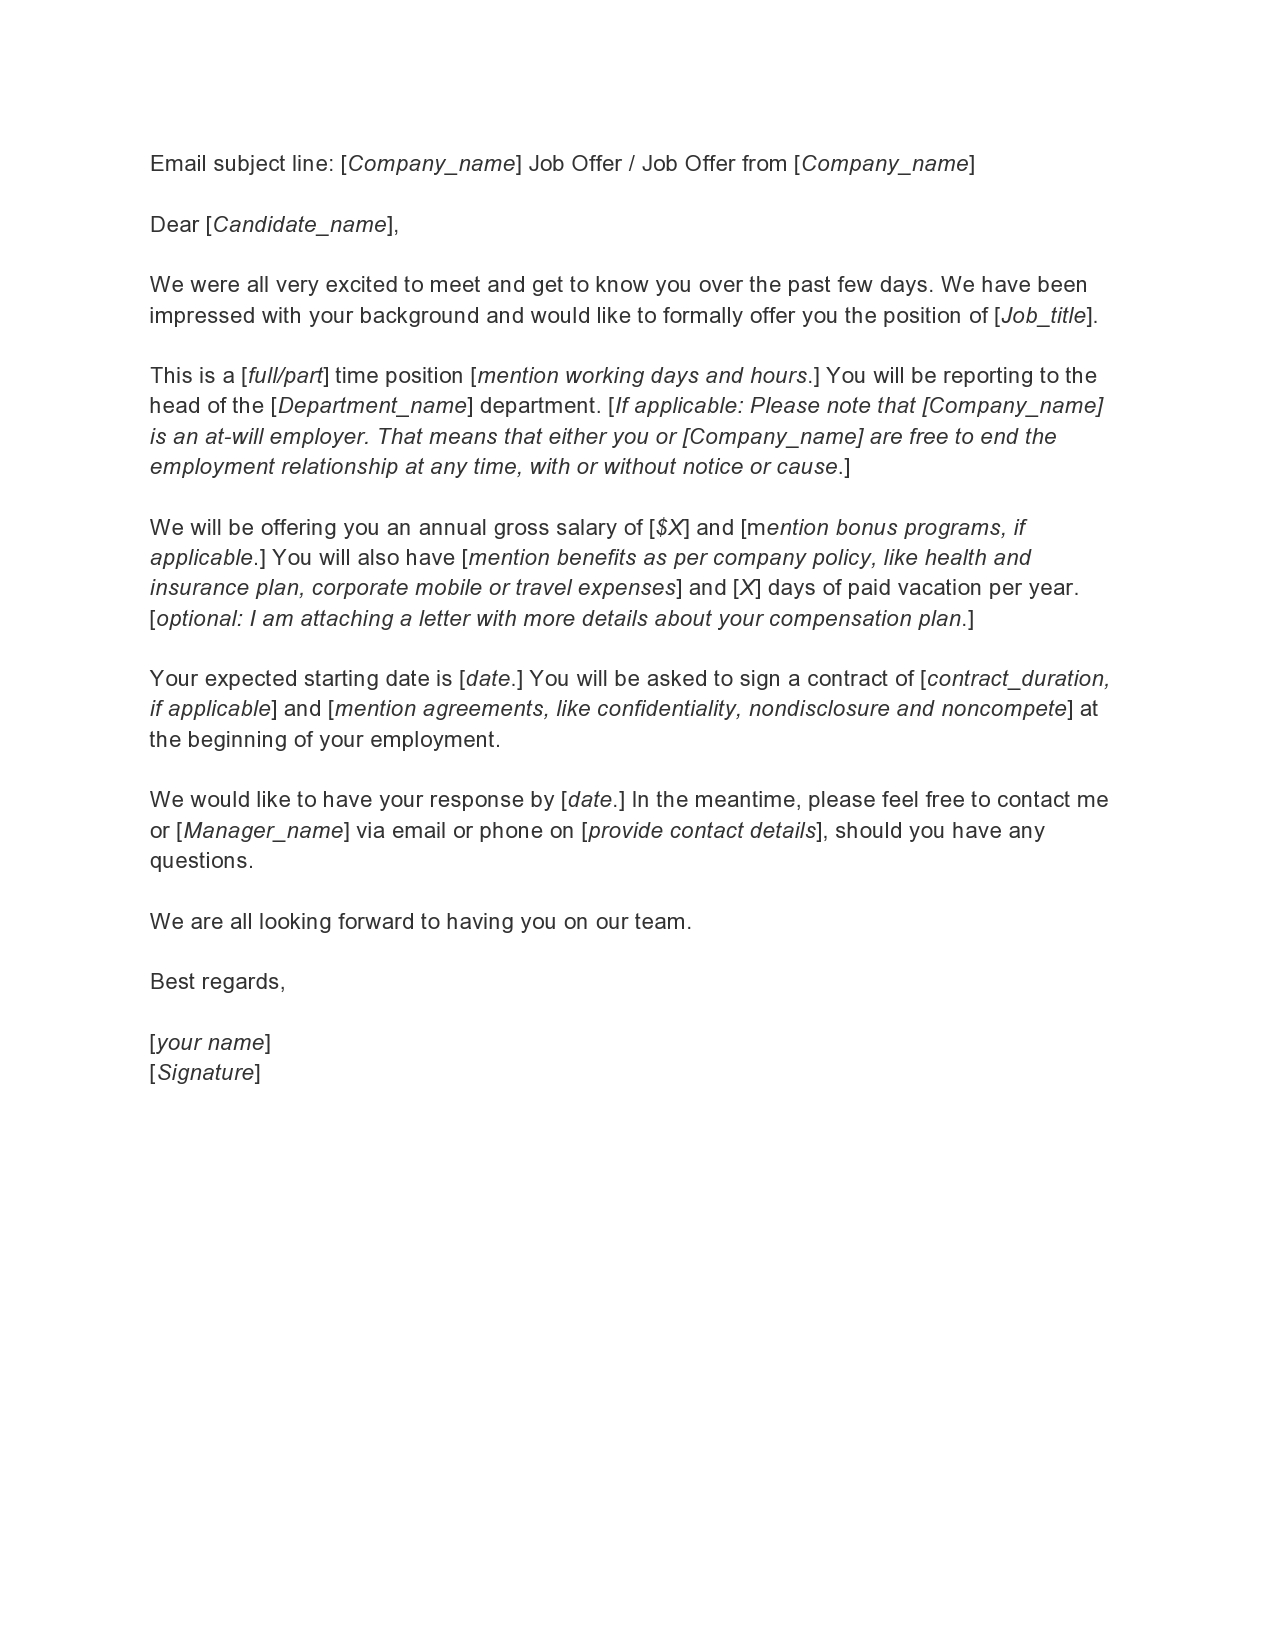 Free employment offer letter template 01